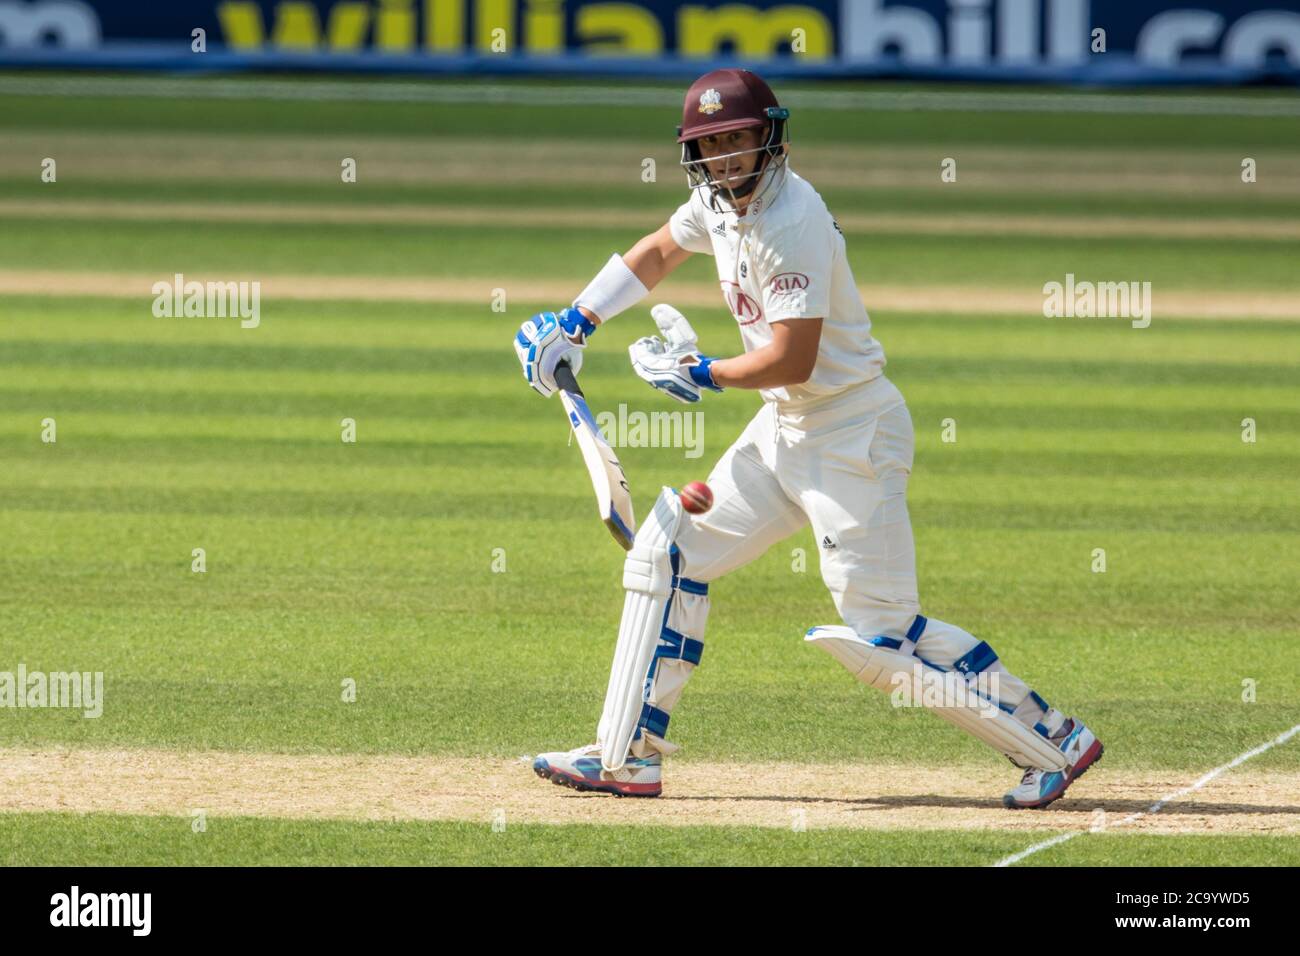 London, UK. 3 August, 2020. XXX batting for Surrey against Middlesex on day  three of the Bob Willis Trophy game at the Oval. David Rowe/Alamy Live News  Stock Photo - Alamy